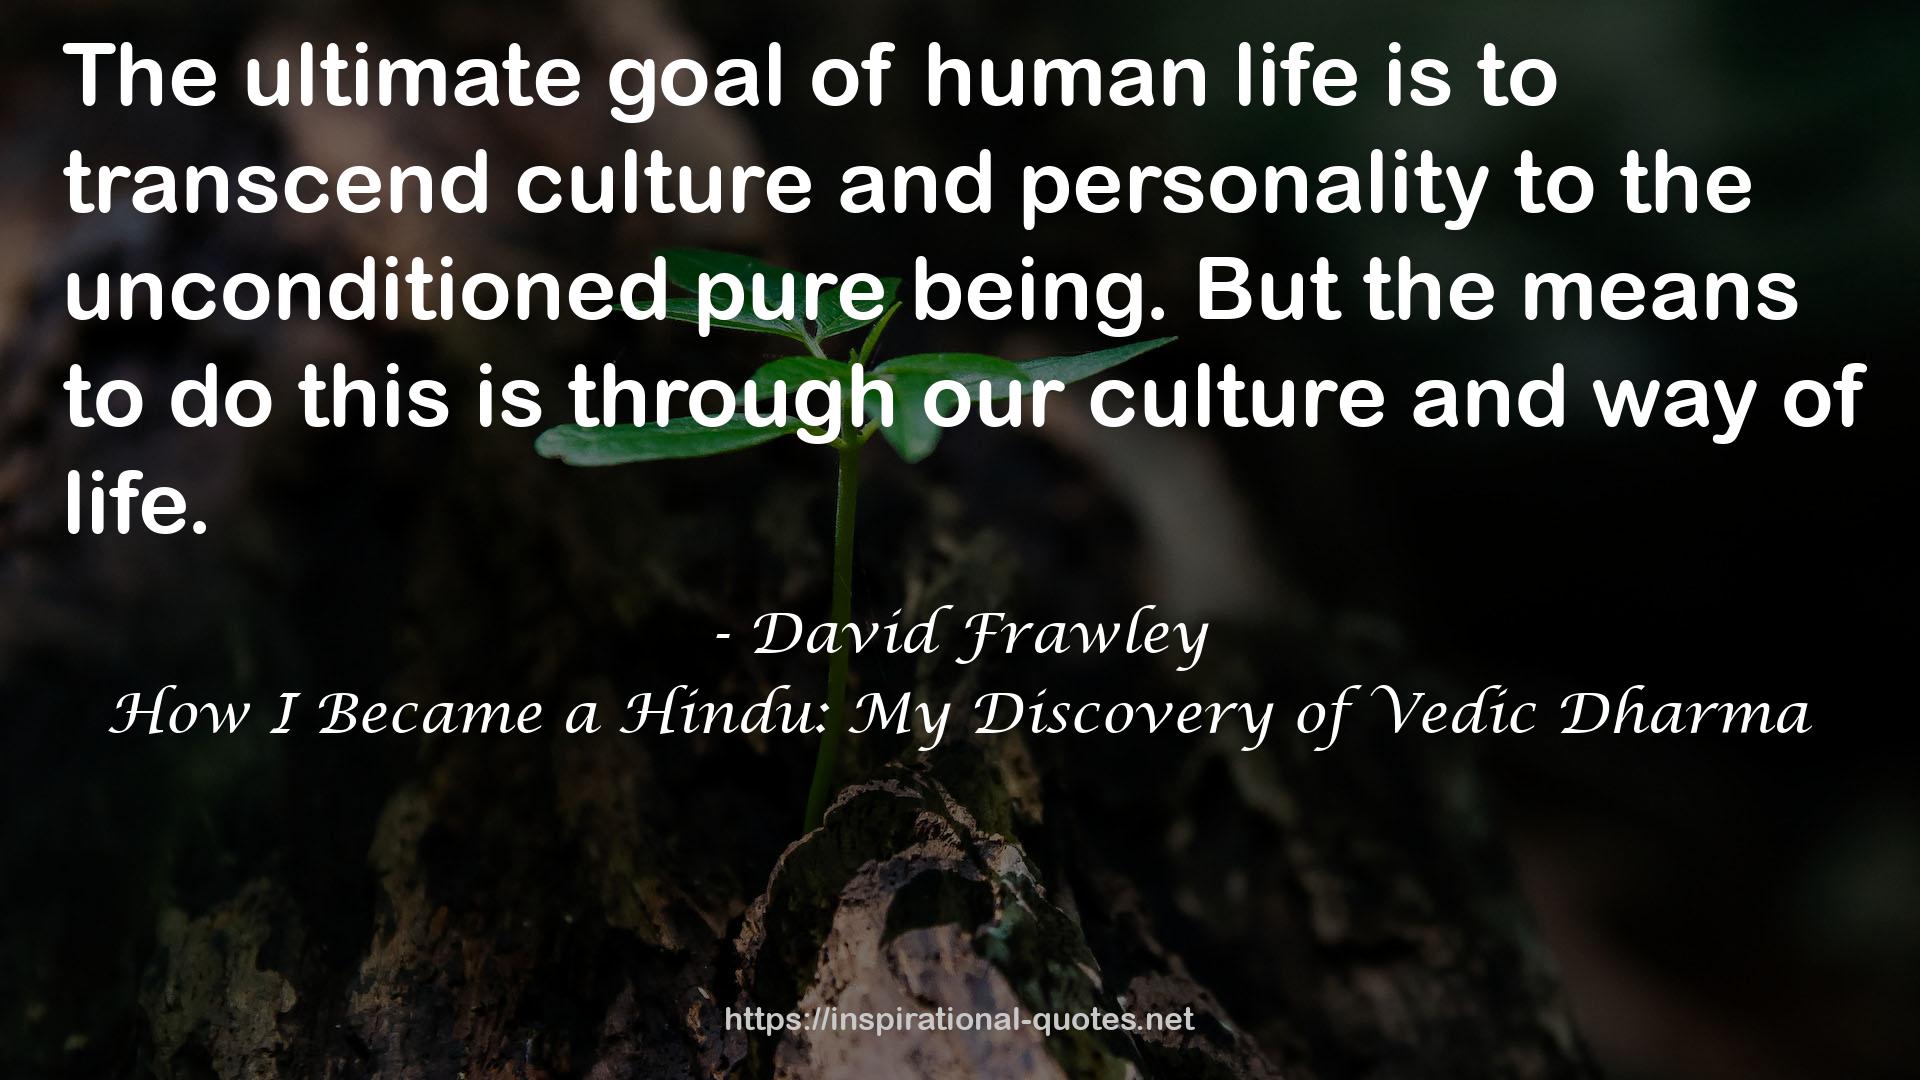 How I Became a Hindu: My Discovery of Vedic Dharma QUOTES